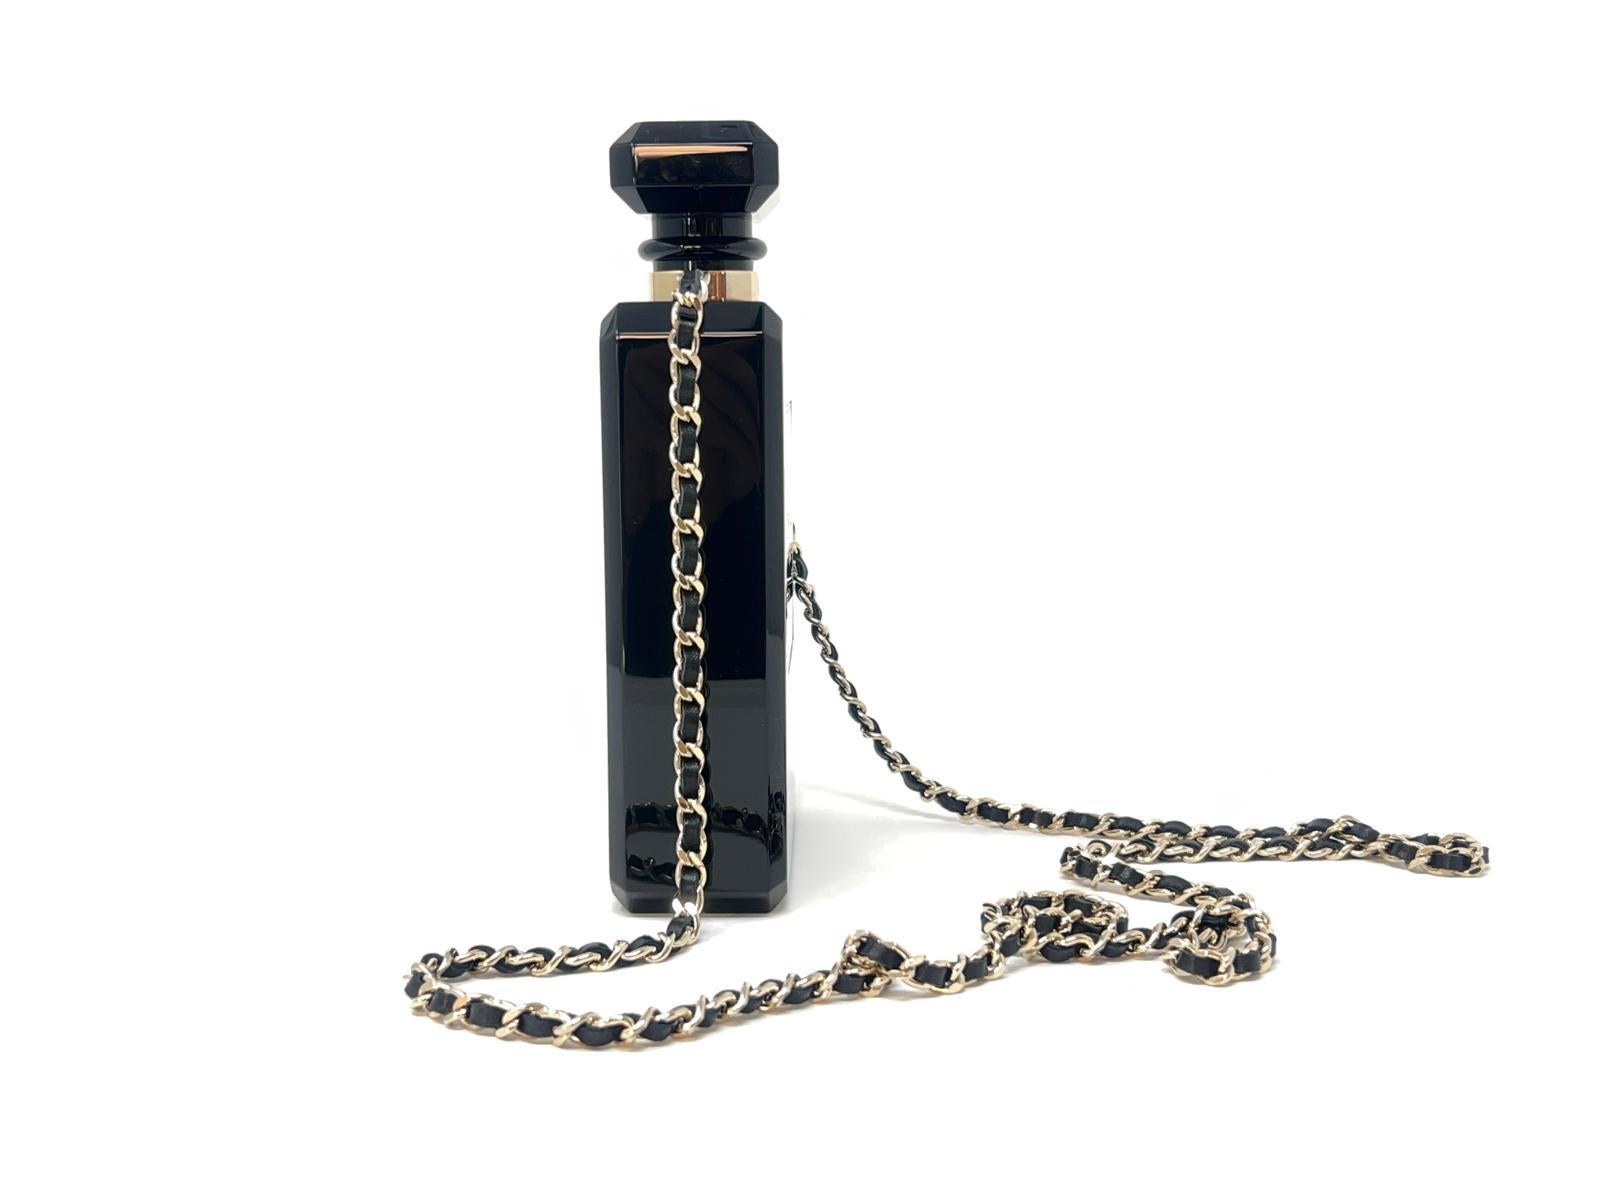 Chanel N5 Black Perfume Bottle Minaudière Cruise Collection 2013  For Sale 11